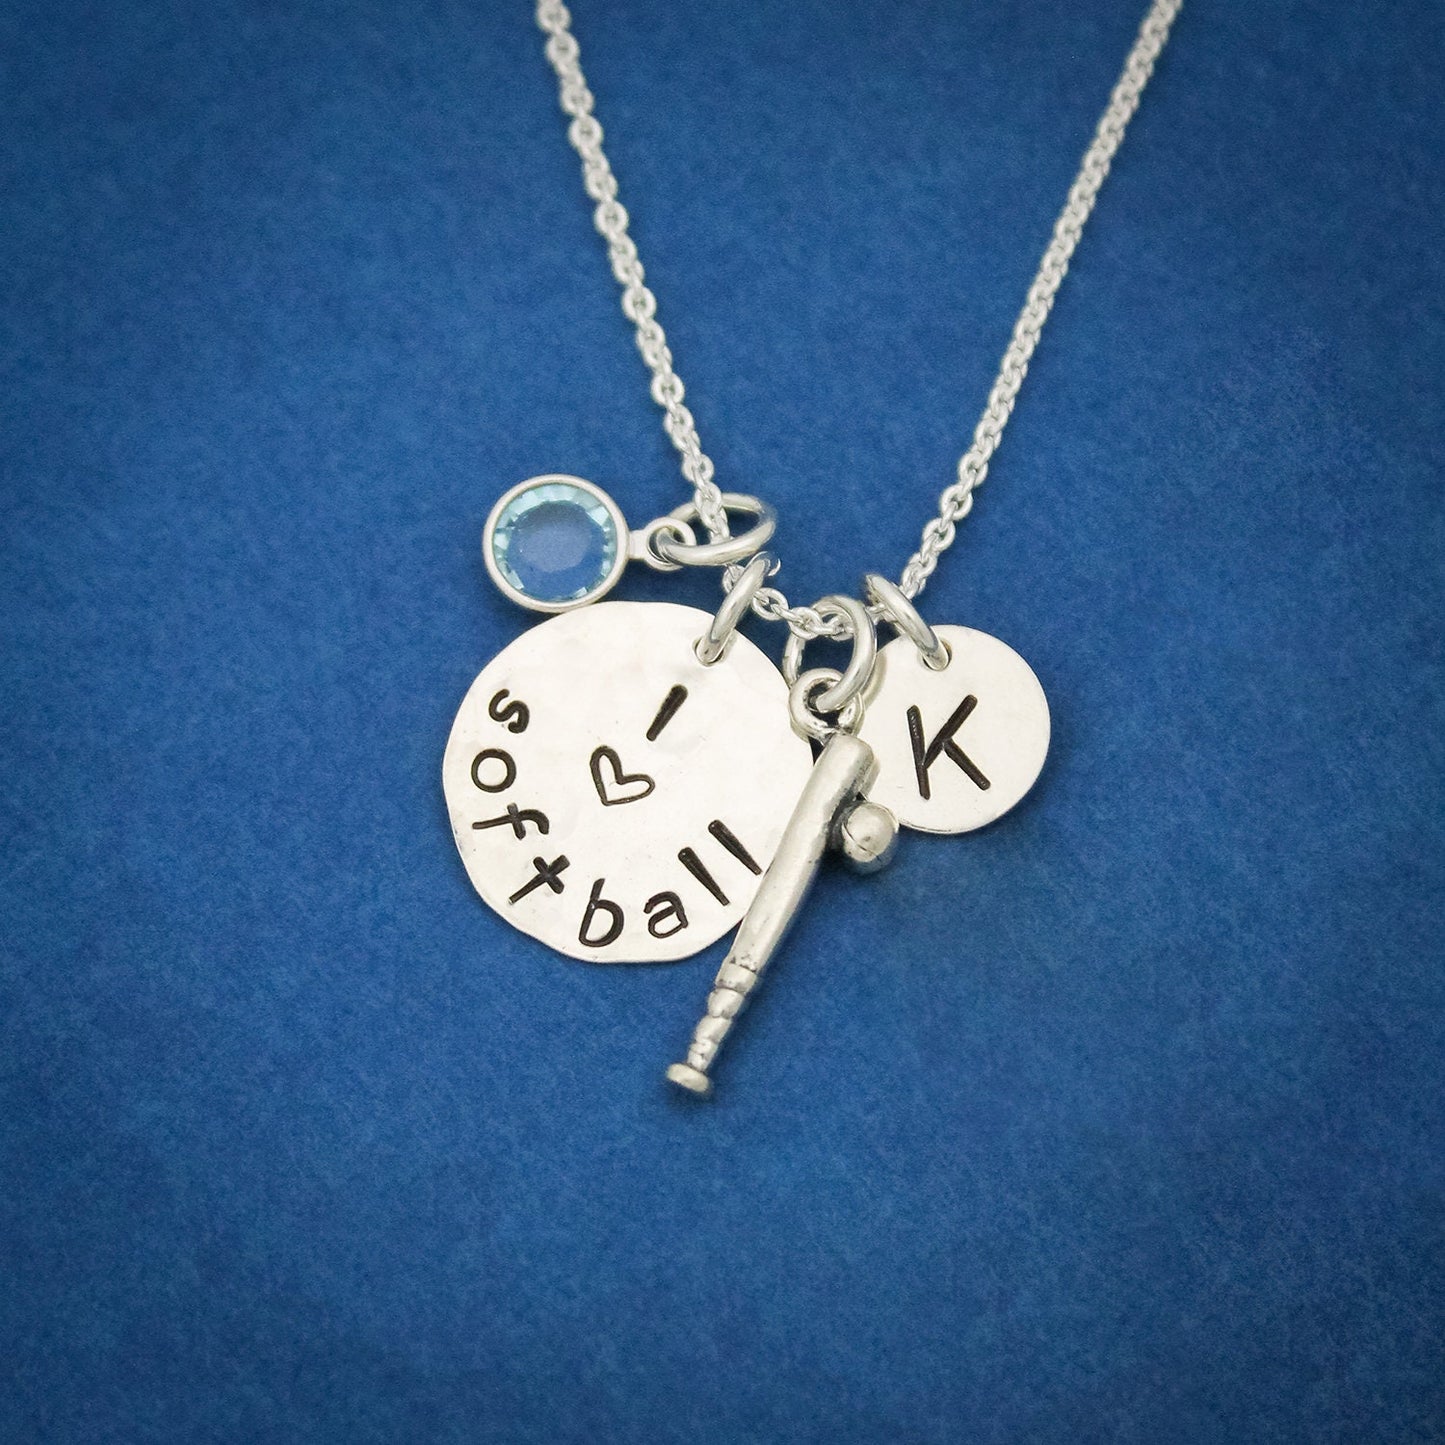 Softball Team Necklace, Silver Baseball Bat + Ball Charm Necklace, Sports Team Jewelry, Personalized Team Jewelry, Hand Stamped Necklace